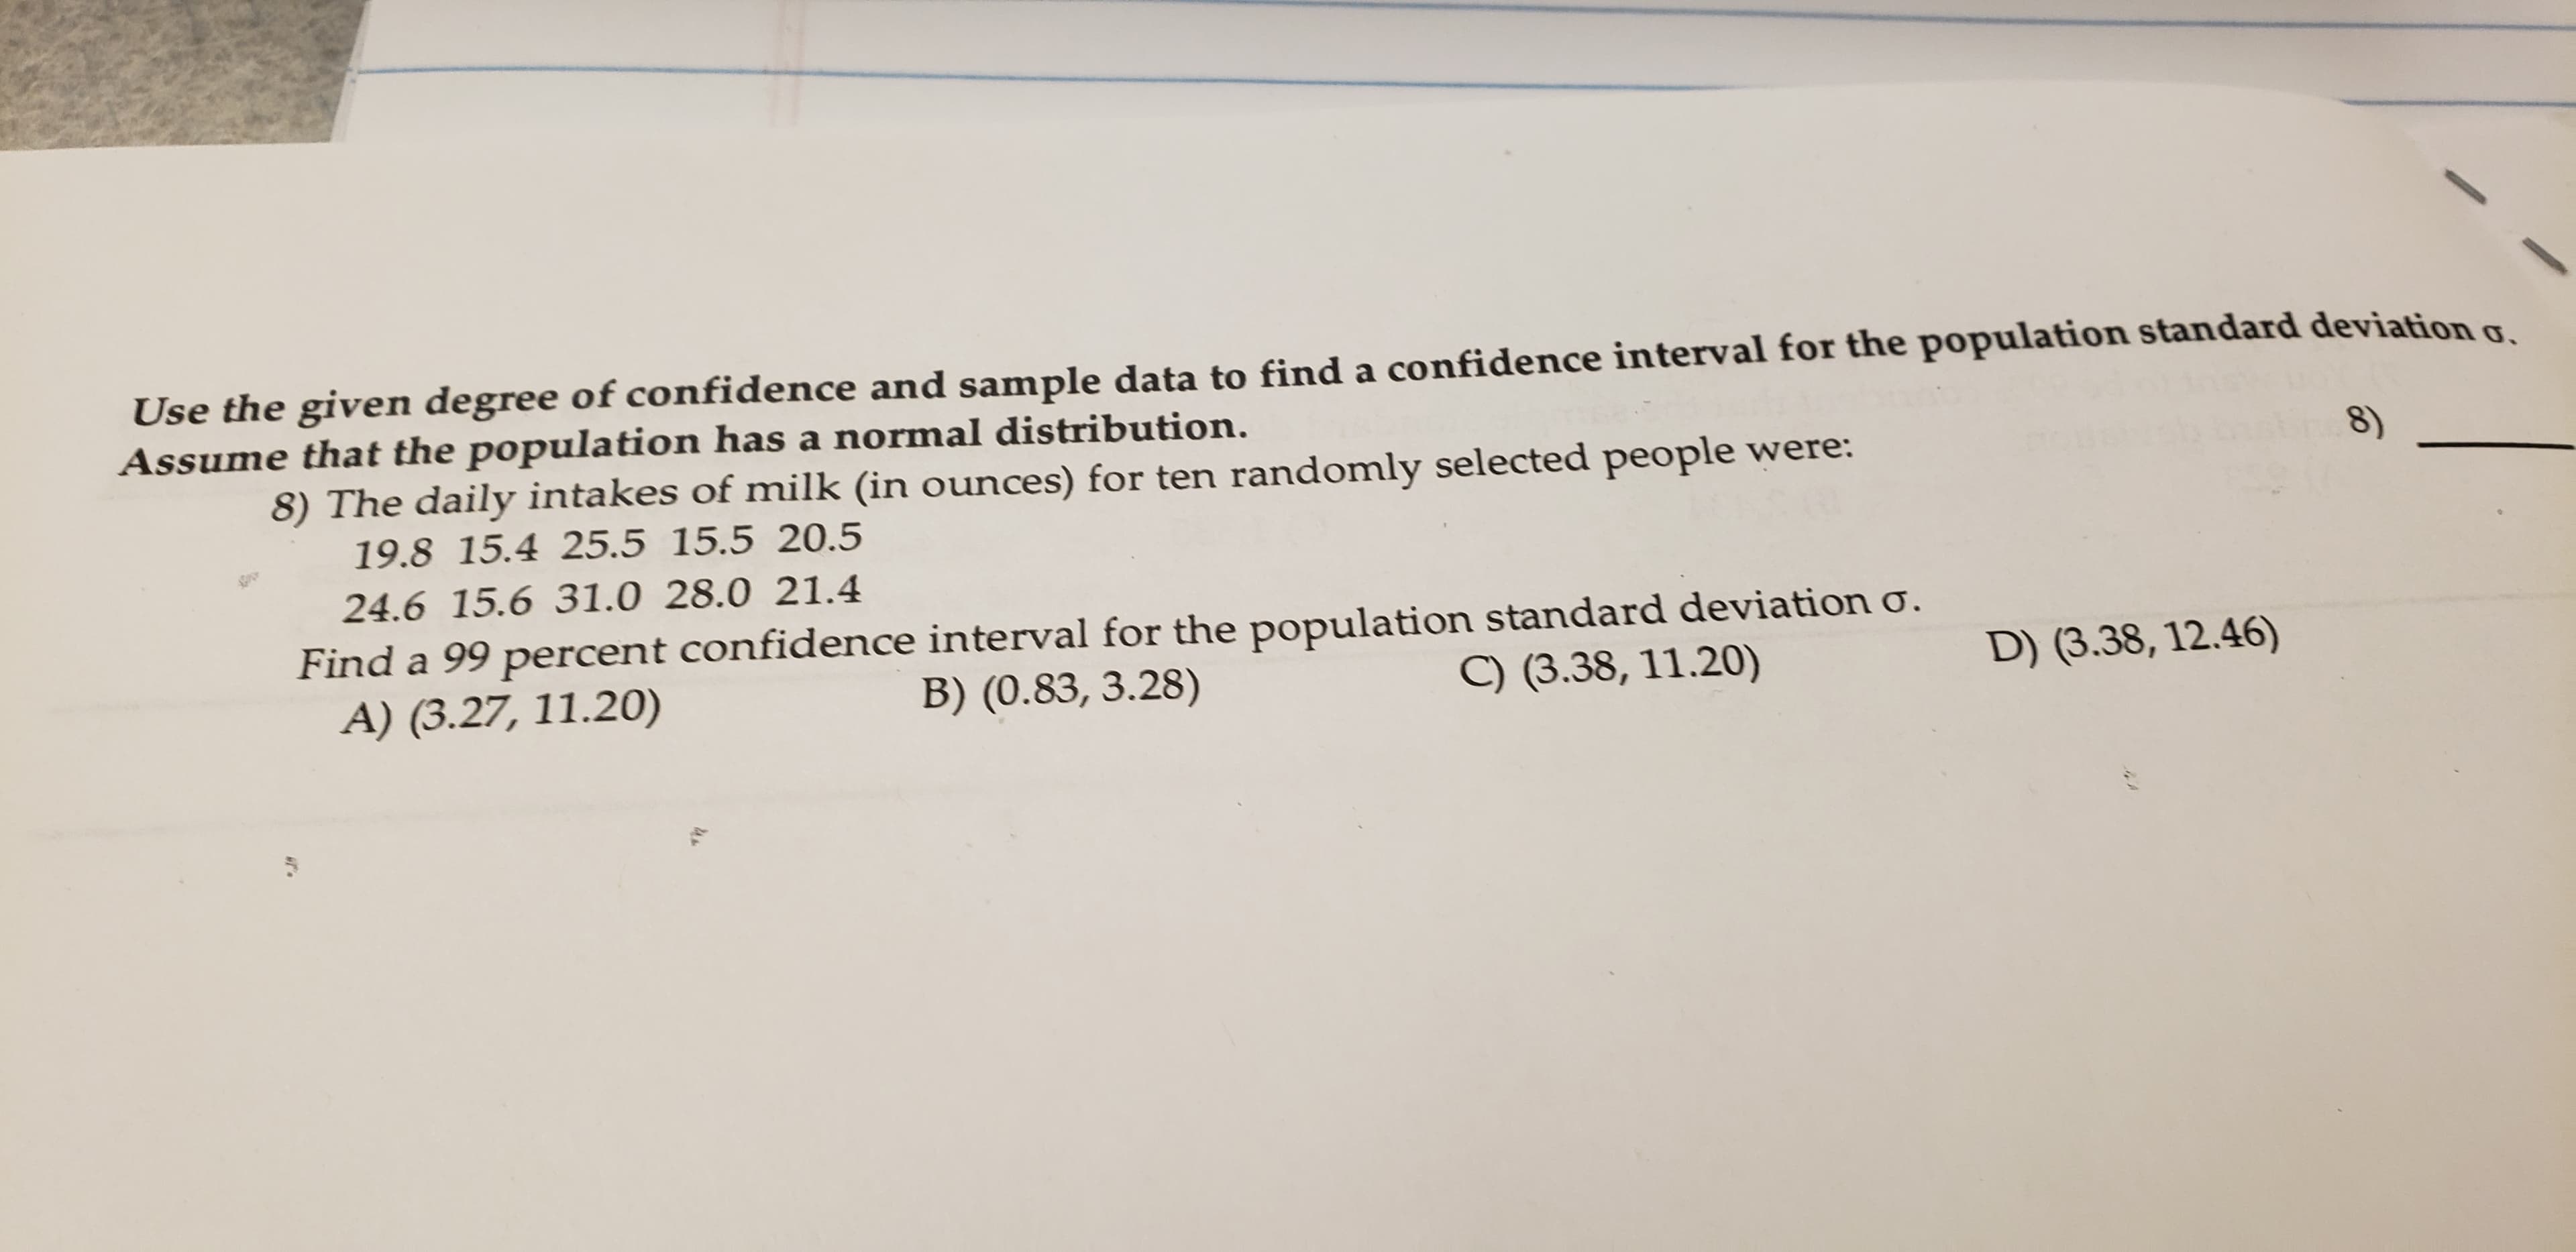 Use the given degree of confidence and sample data to find a confidence interval for the population standard deviation g
Assume that the population has a normal distribution.
8) The daily intakes of milk (in ounces) for ten randomly selected people were:
19.8 15.4 25.5 15.5 20.5
8)
24.6 15.6 31.0 28.0 21.4
Find a 99 percent confidence interval for the population standard deviation o.
A) (3.27, 11.20)
D) (3.38, 12.46)
B) (0.83, 3.28)
C) (3.38, 11.20)
